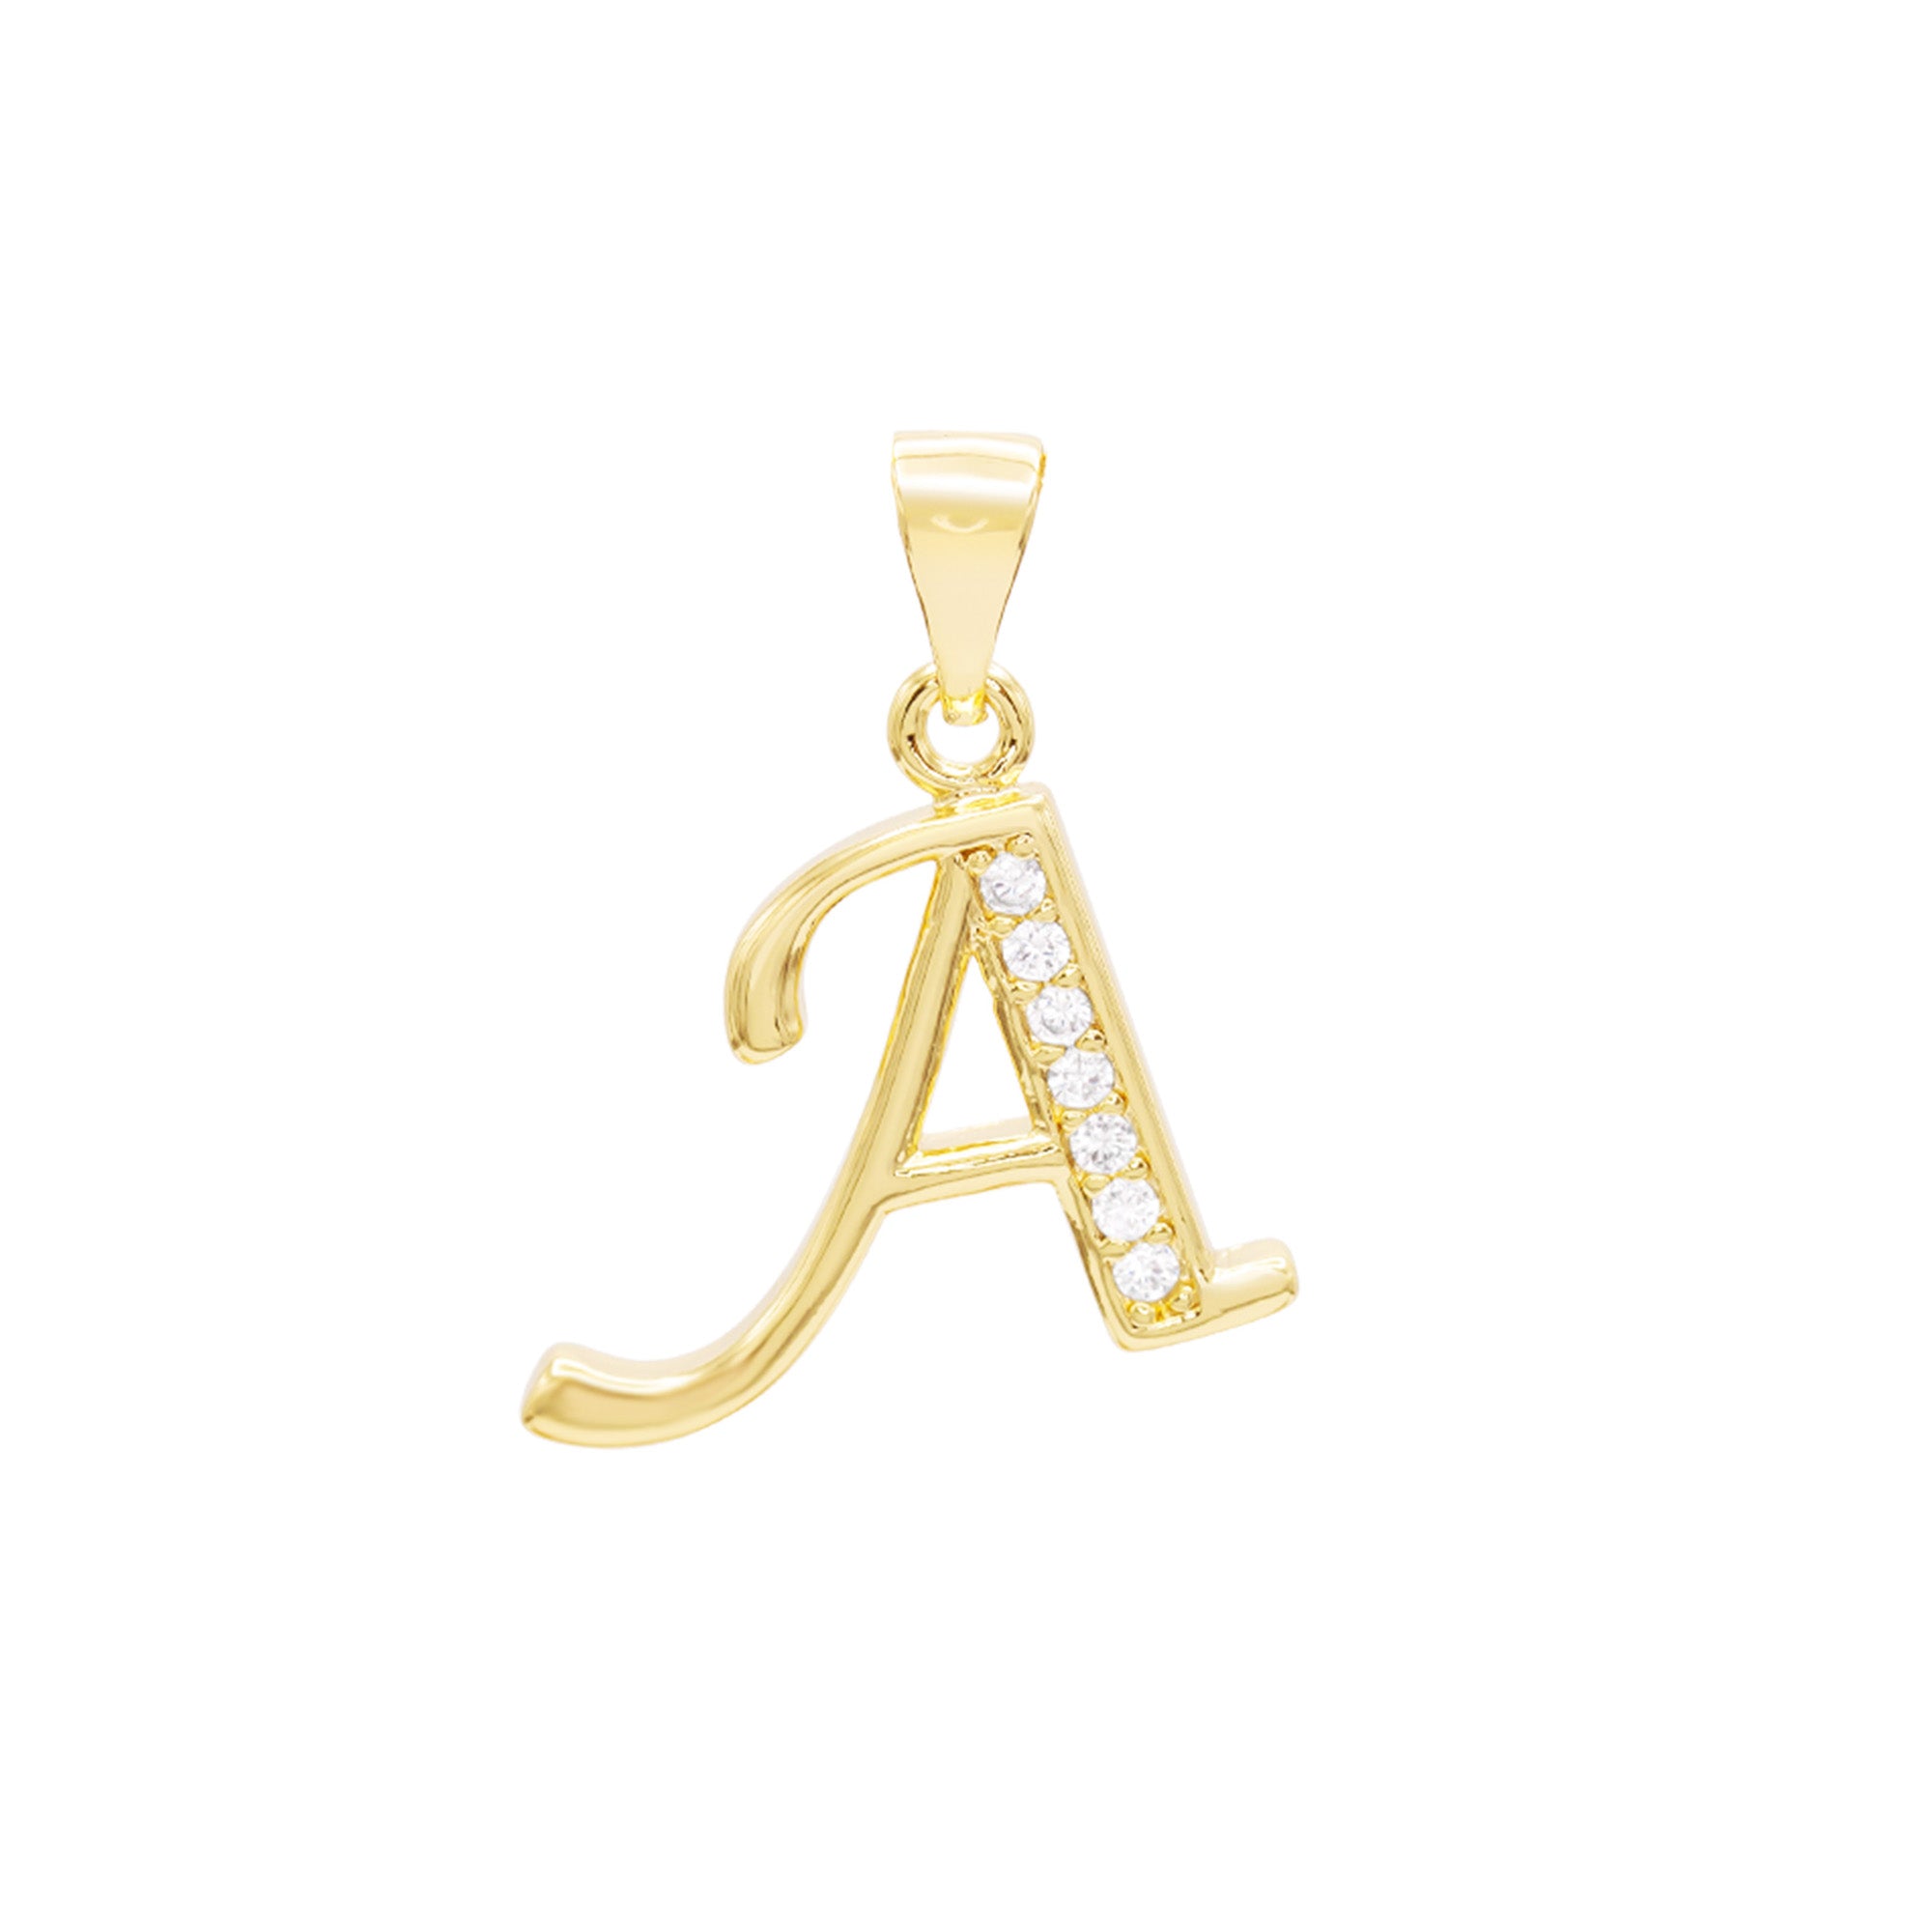 A Pendant 14K Gold Filled Charm